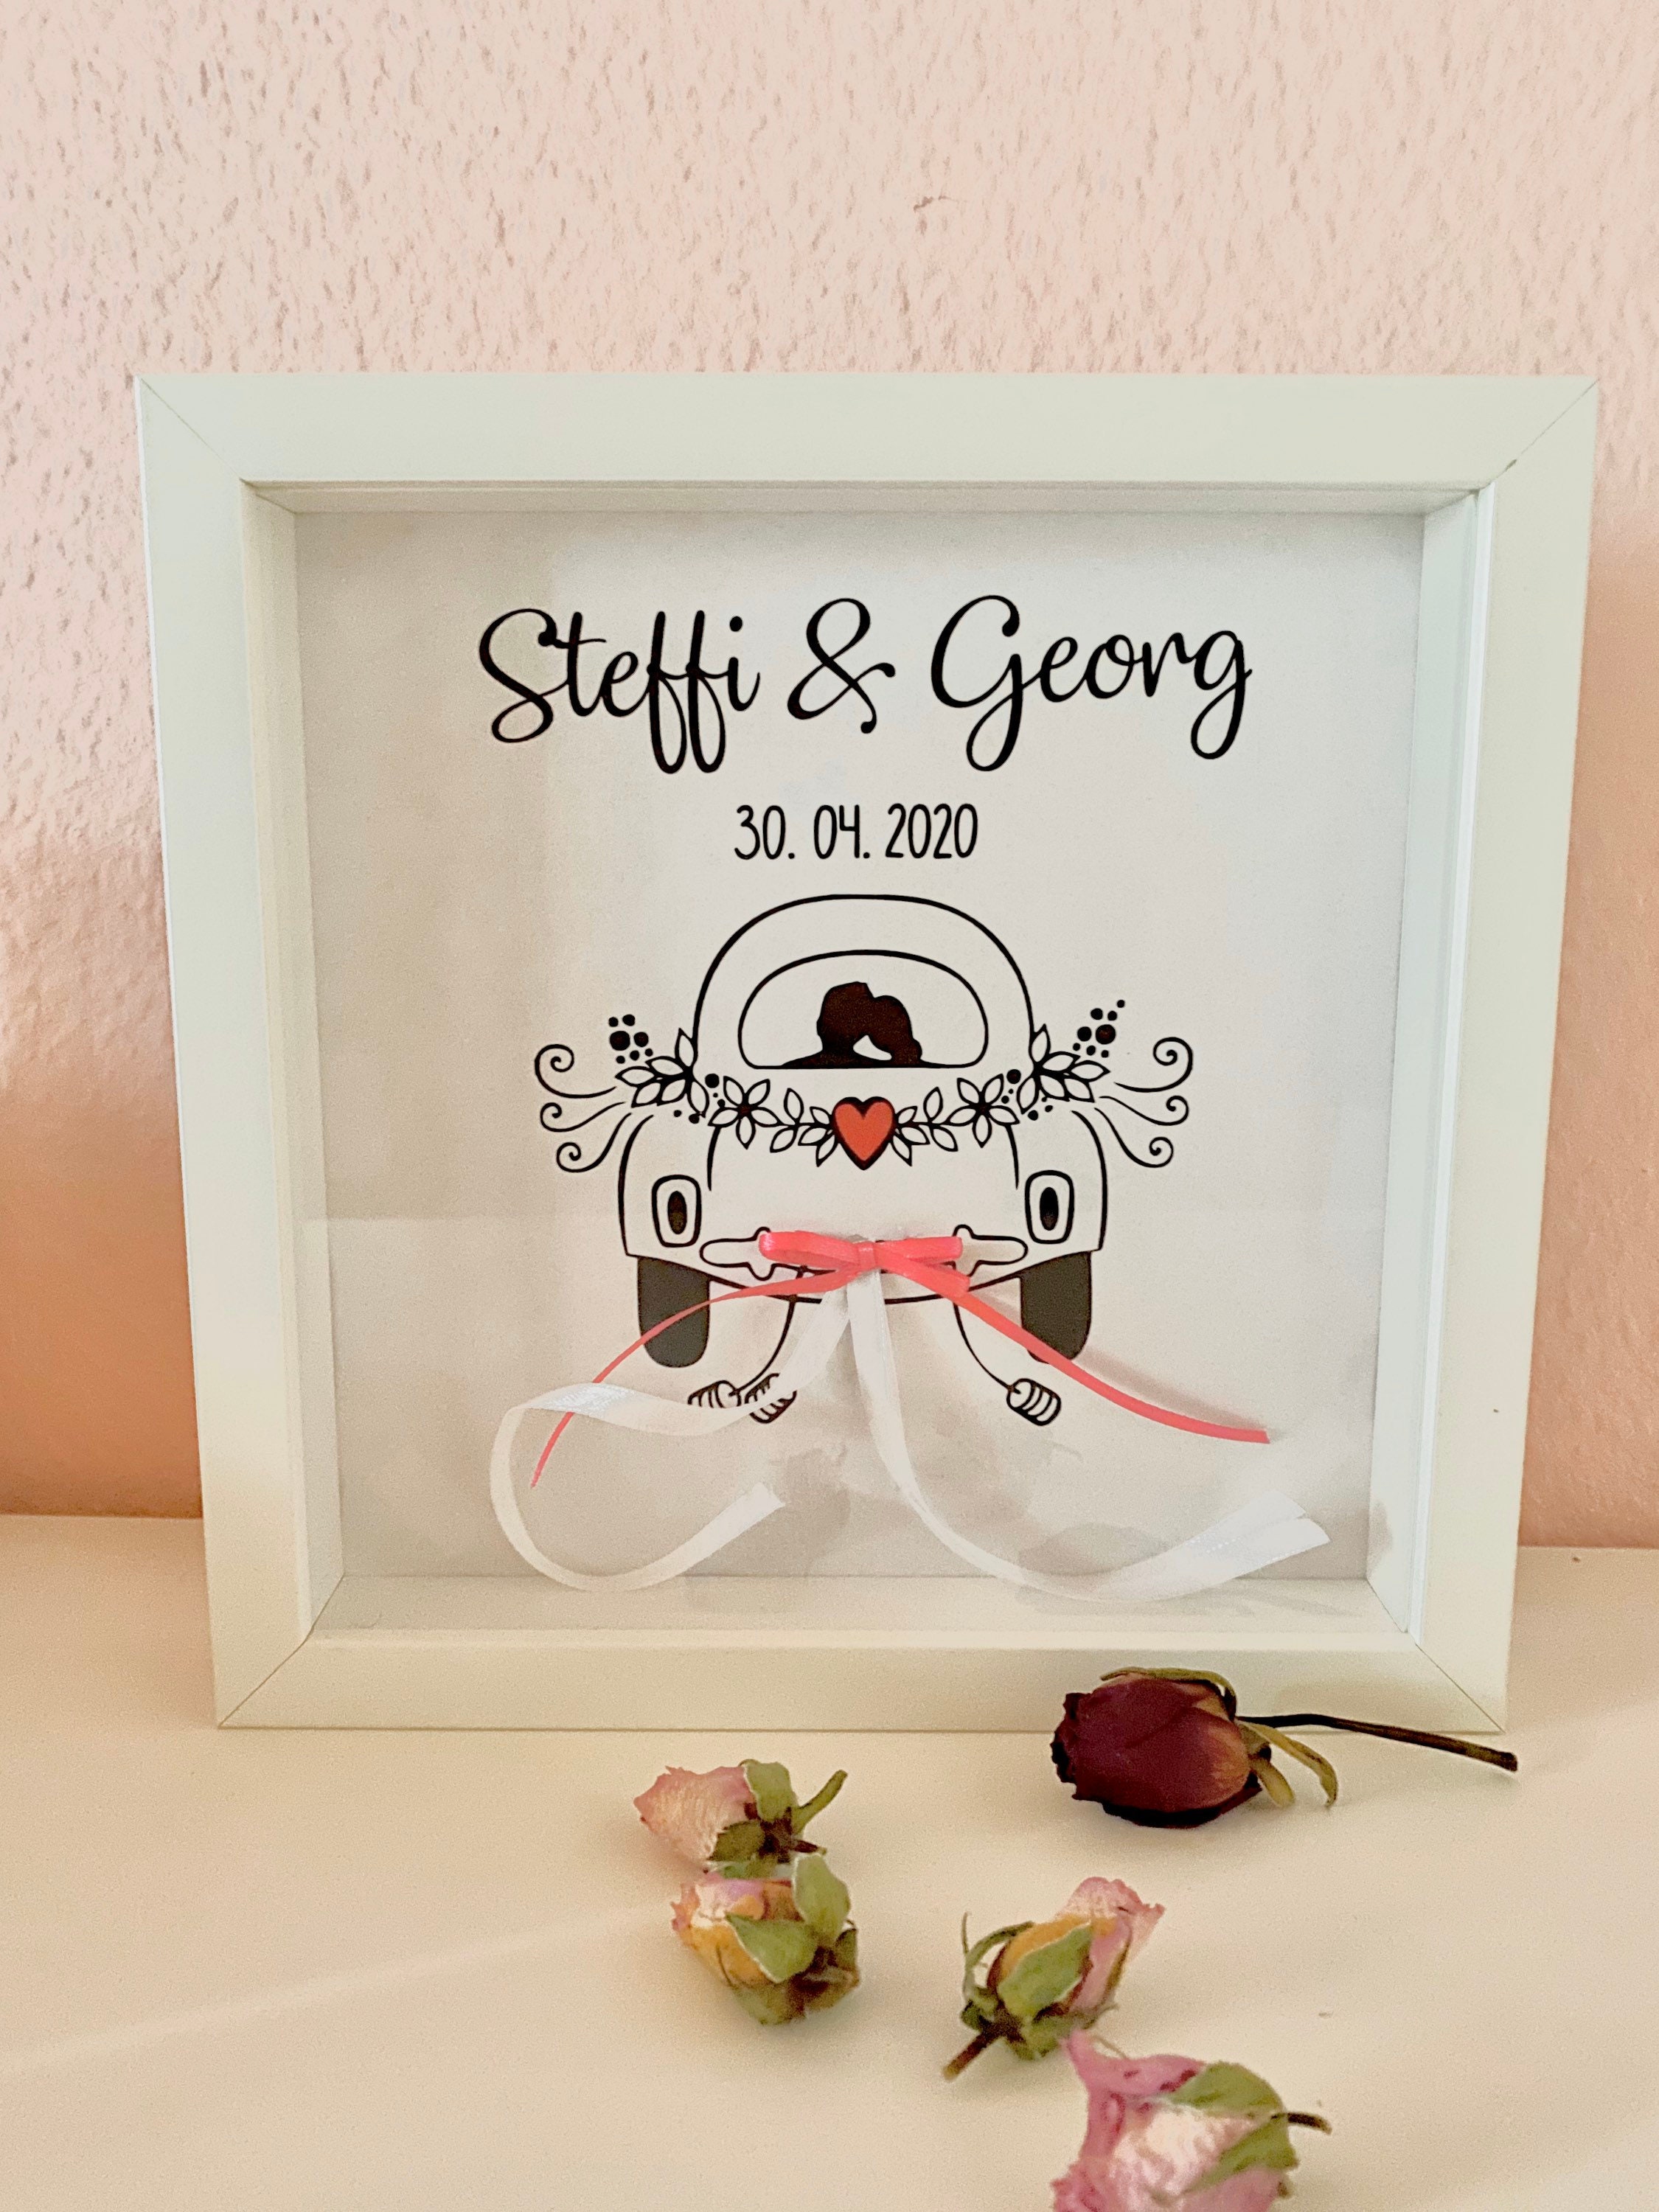  Wedding Money Gift Picture Frame, A5 Wooden Frame Money Gift  Holder for Bride and Groom, Creative Money Gift Idea for Wedding, Just  Married Wedding Photo Frame (Wedding-Just Married)